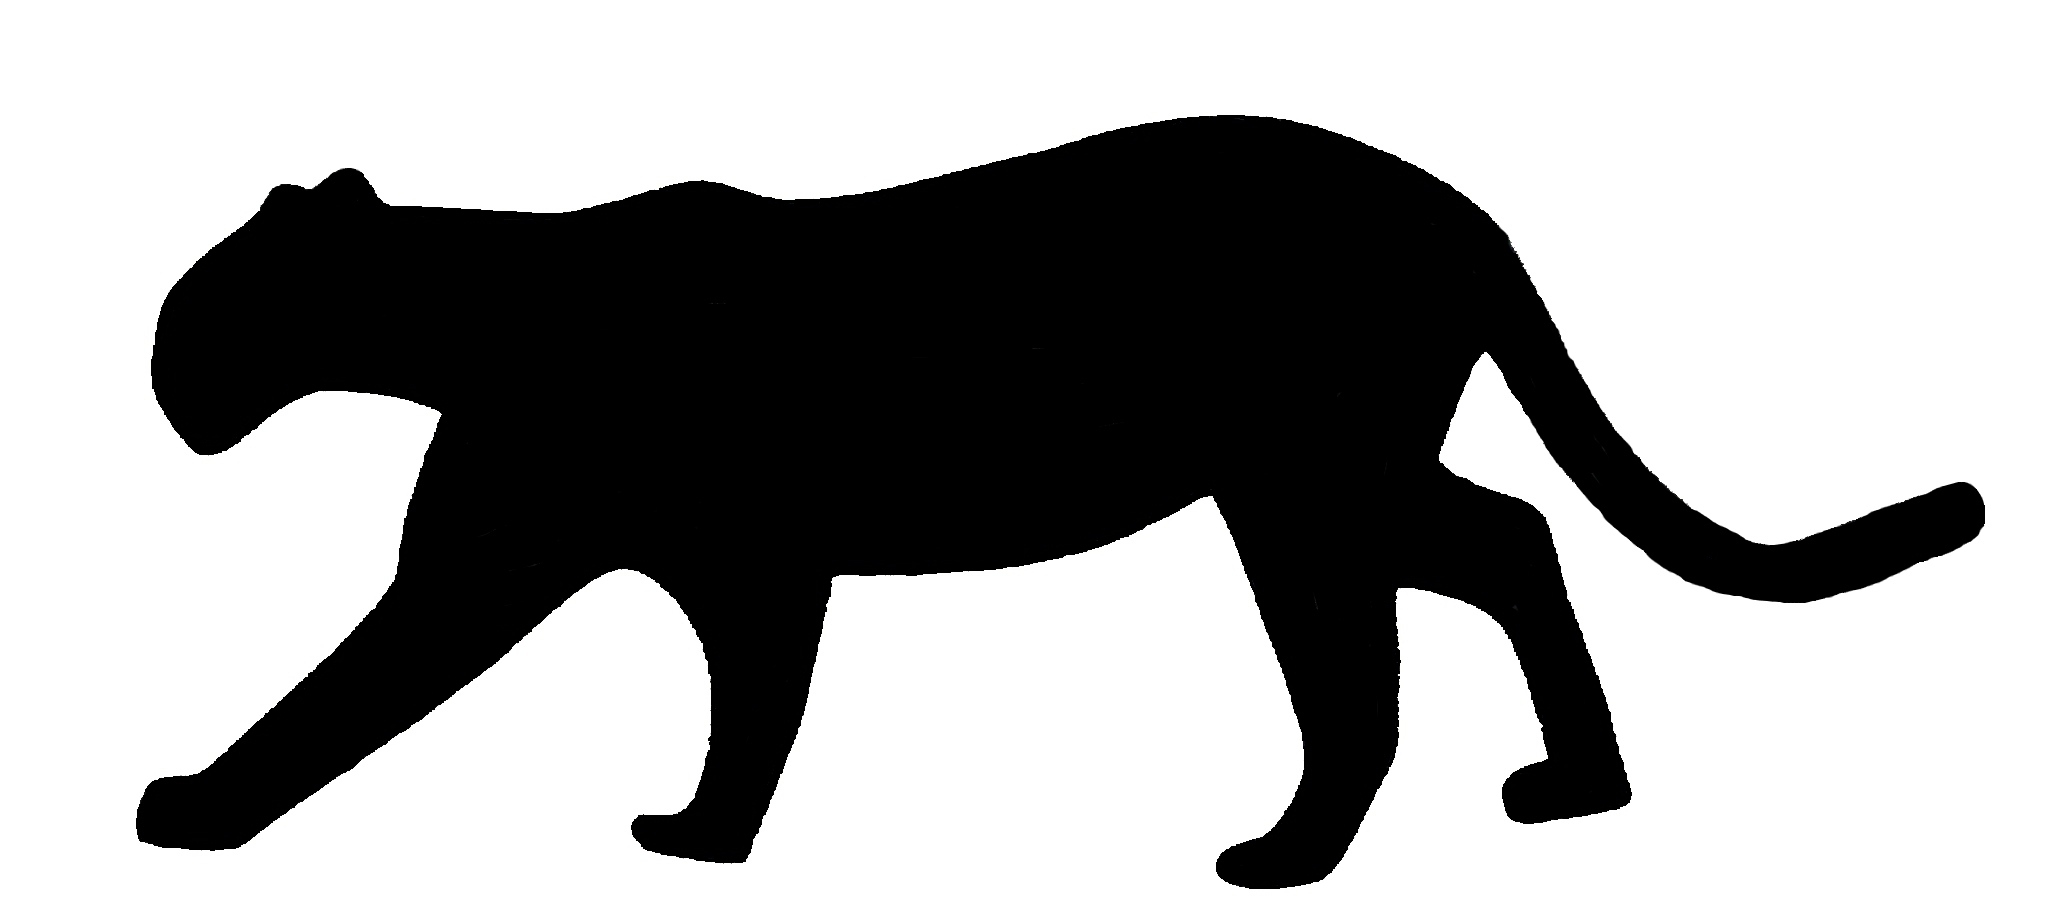 Black Panther Silhouette   Clipart Best